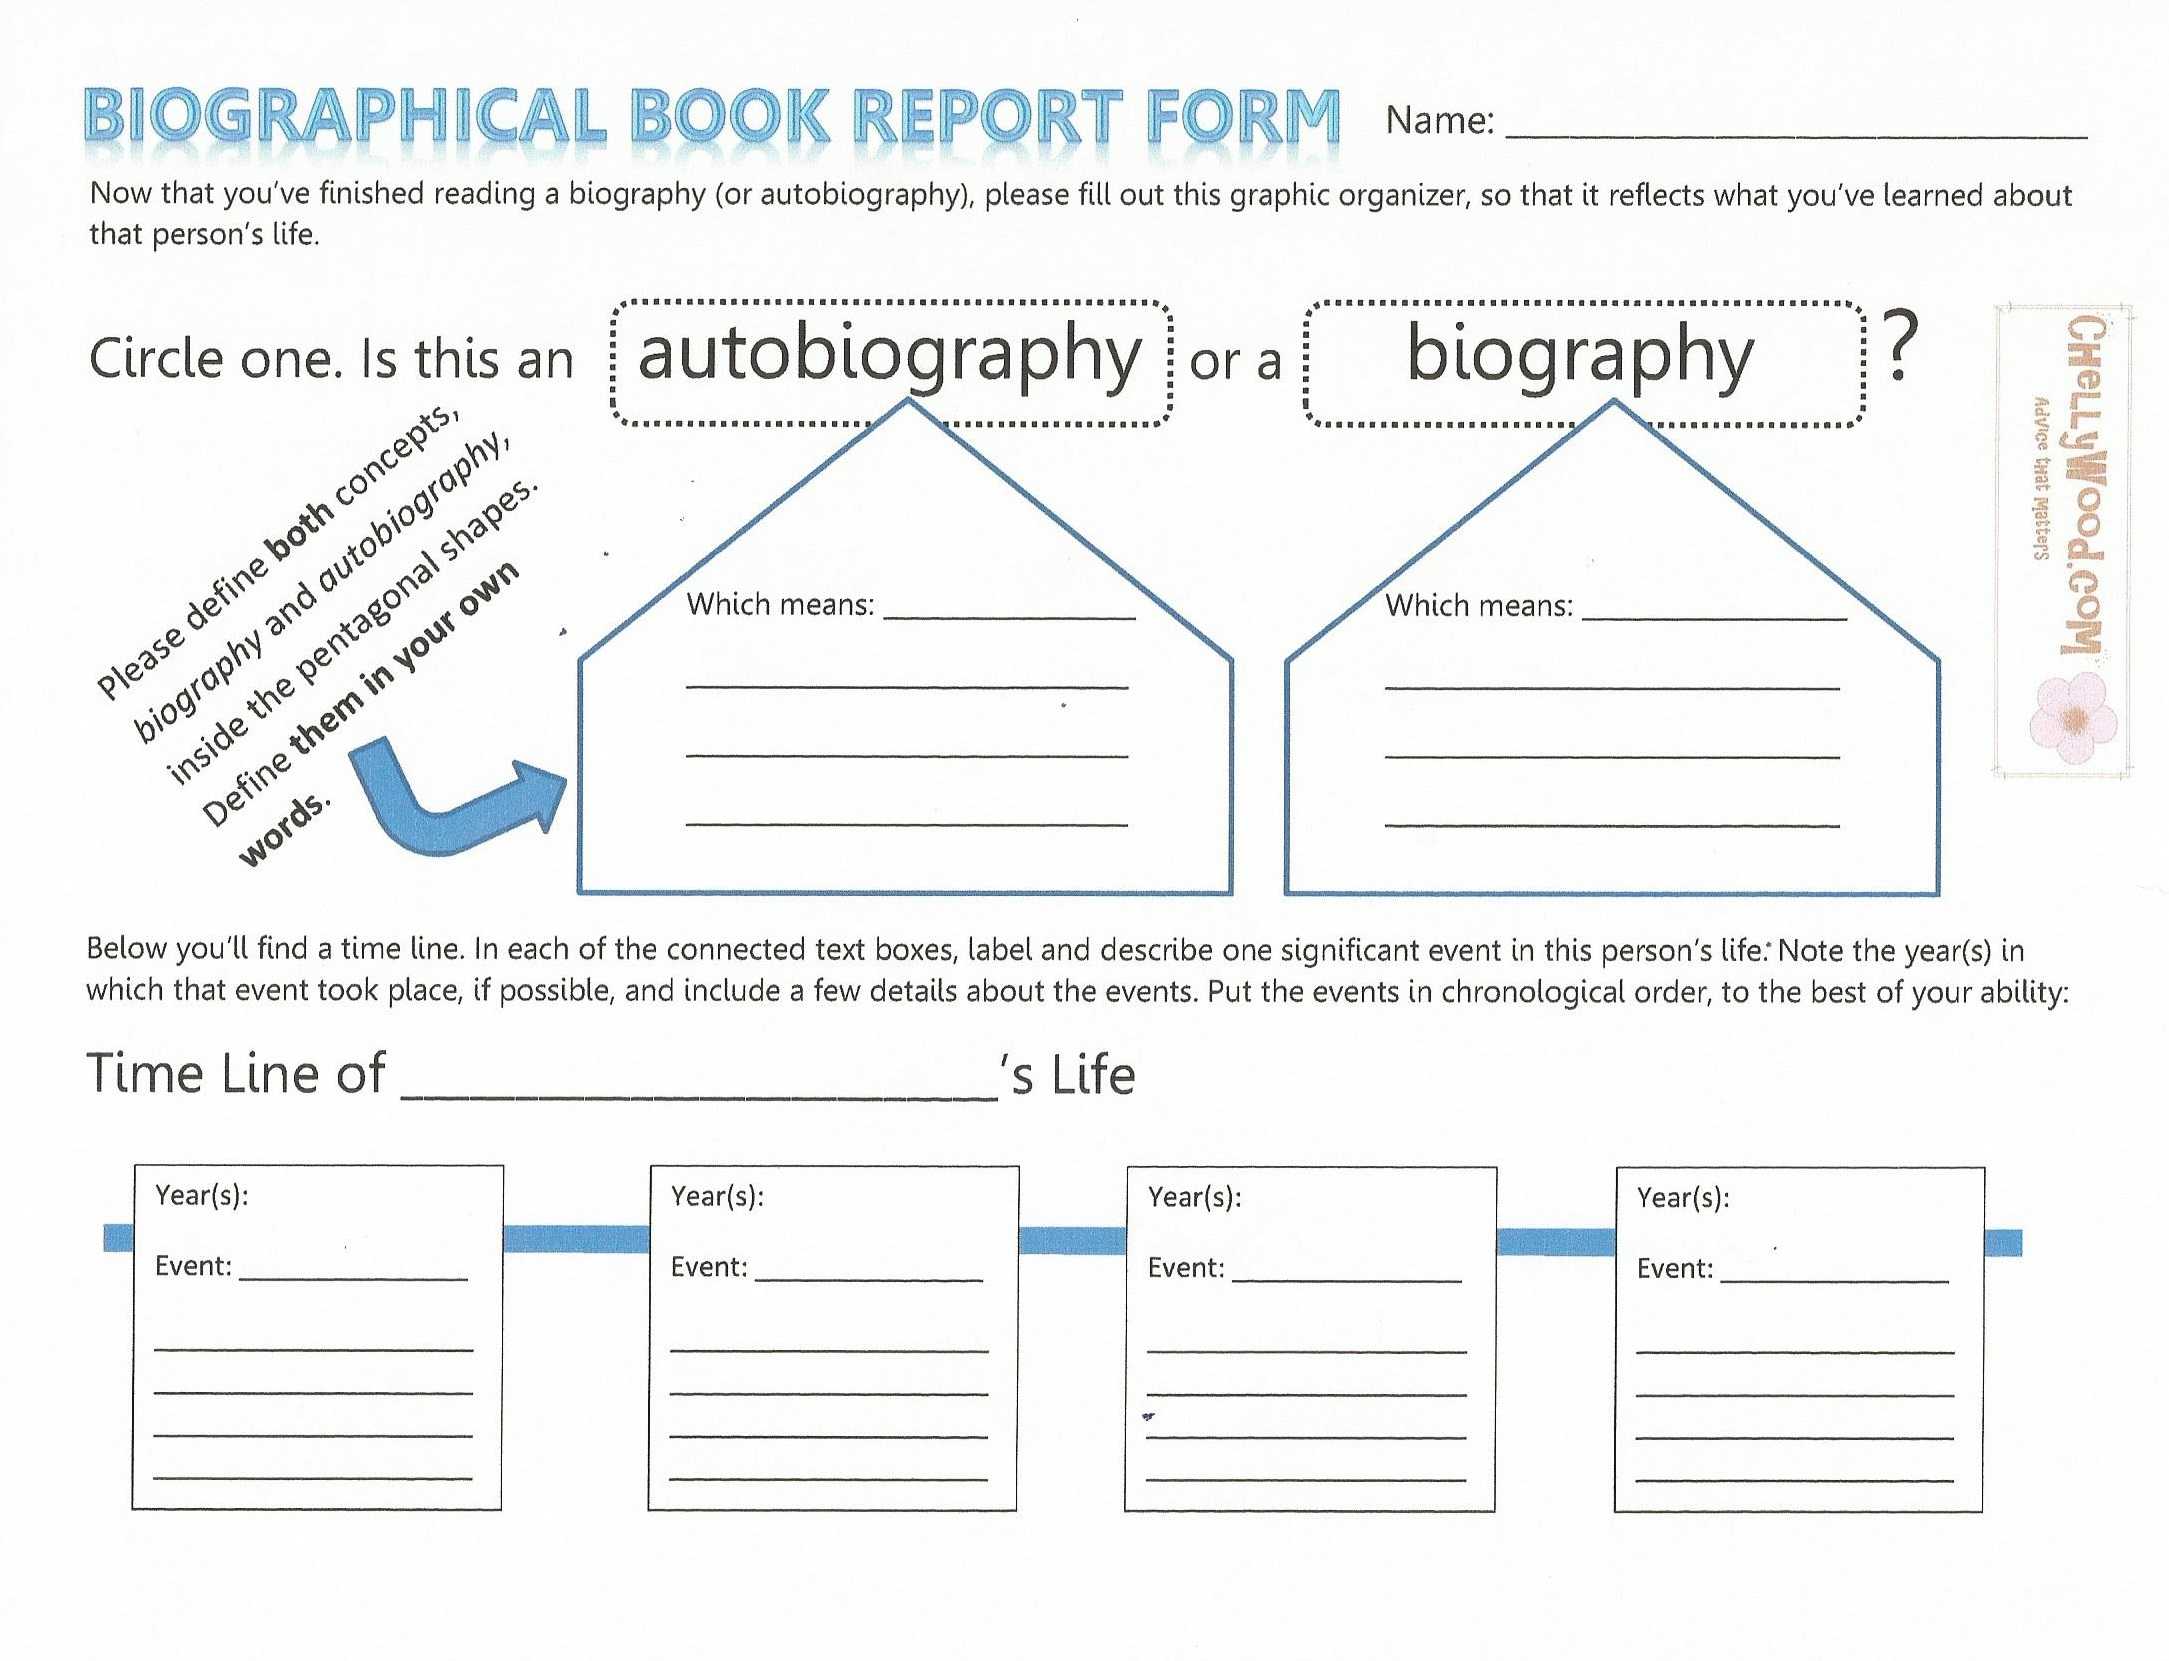 Biographical Book Report Form For Teaching Nonfiction Using With Biography Book Report Template